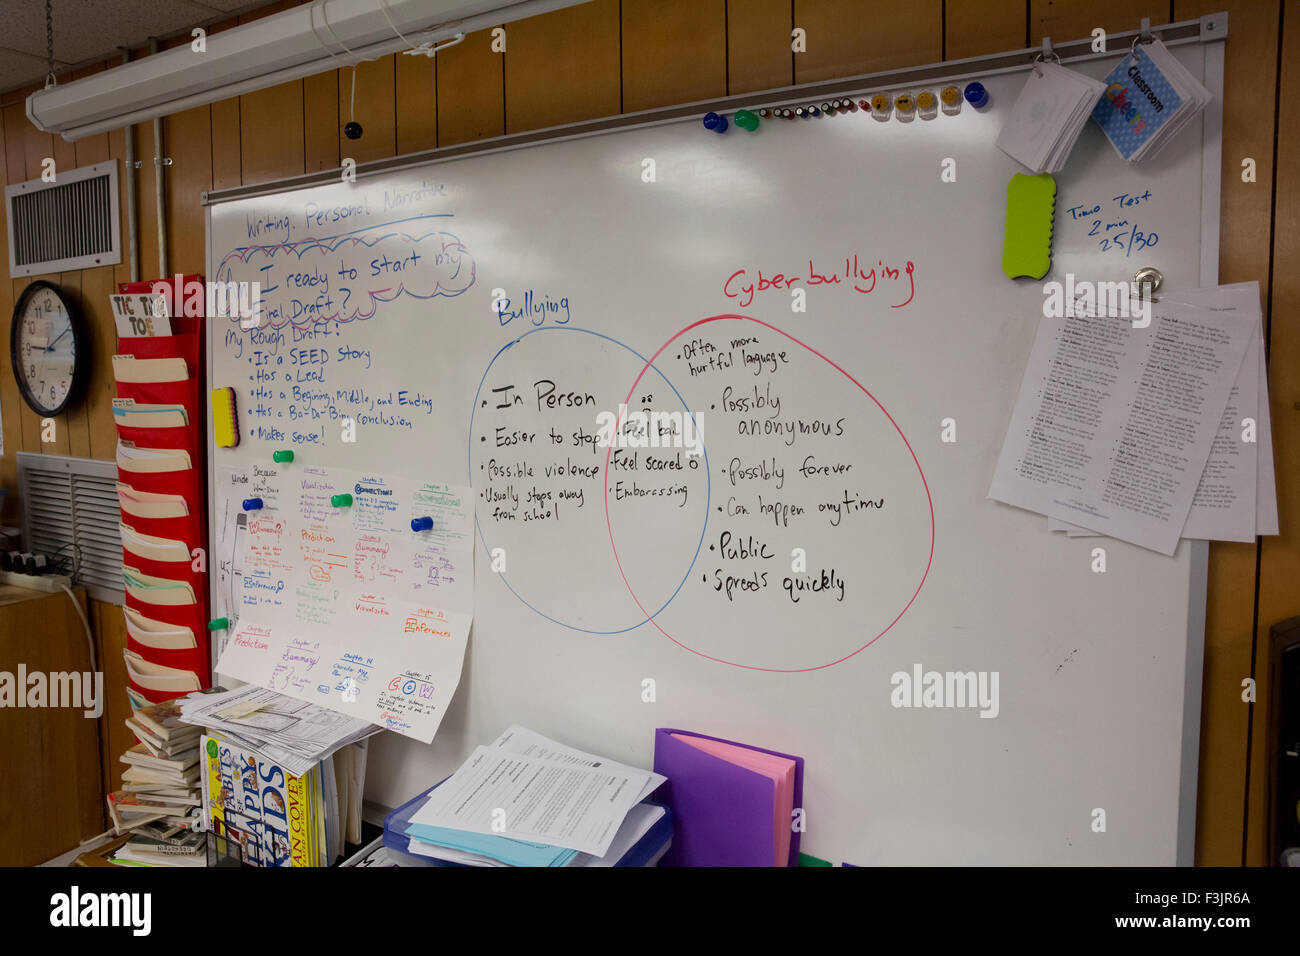 Whiteboard in 4th grade elementary school classroom in Texas with a venn diagram with information on bullying and cyberbullying Stock Photo